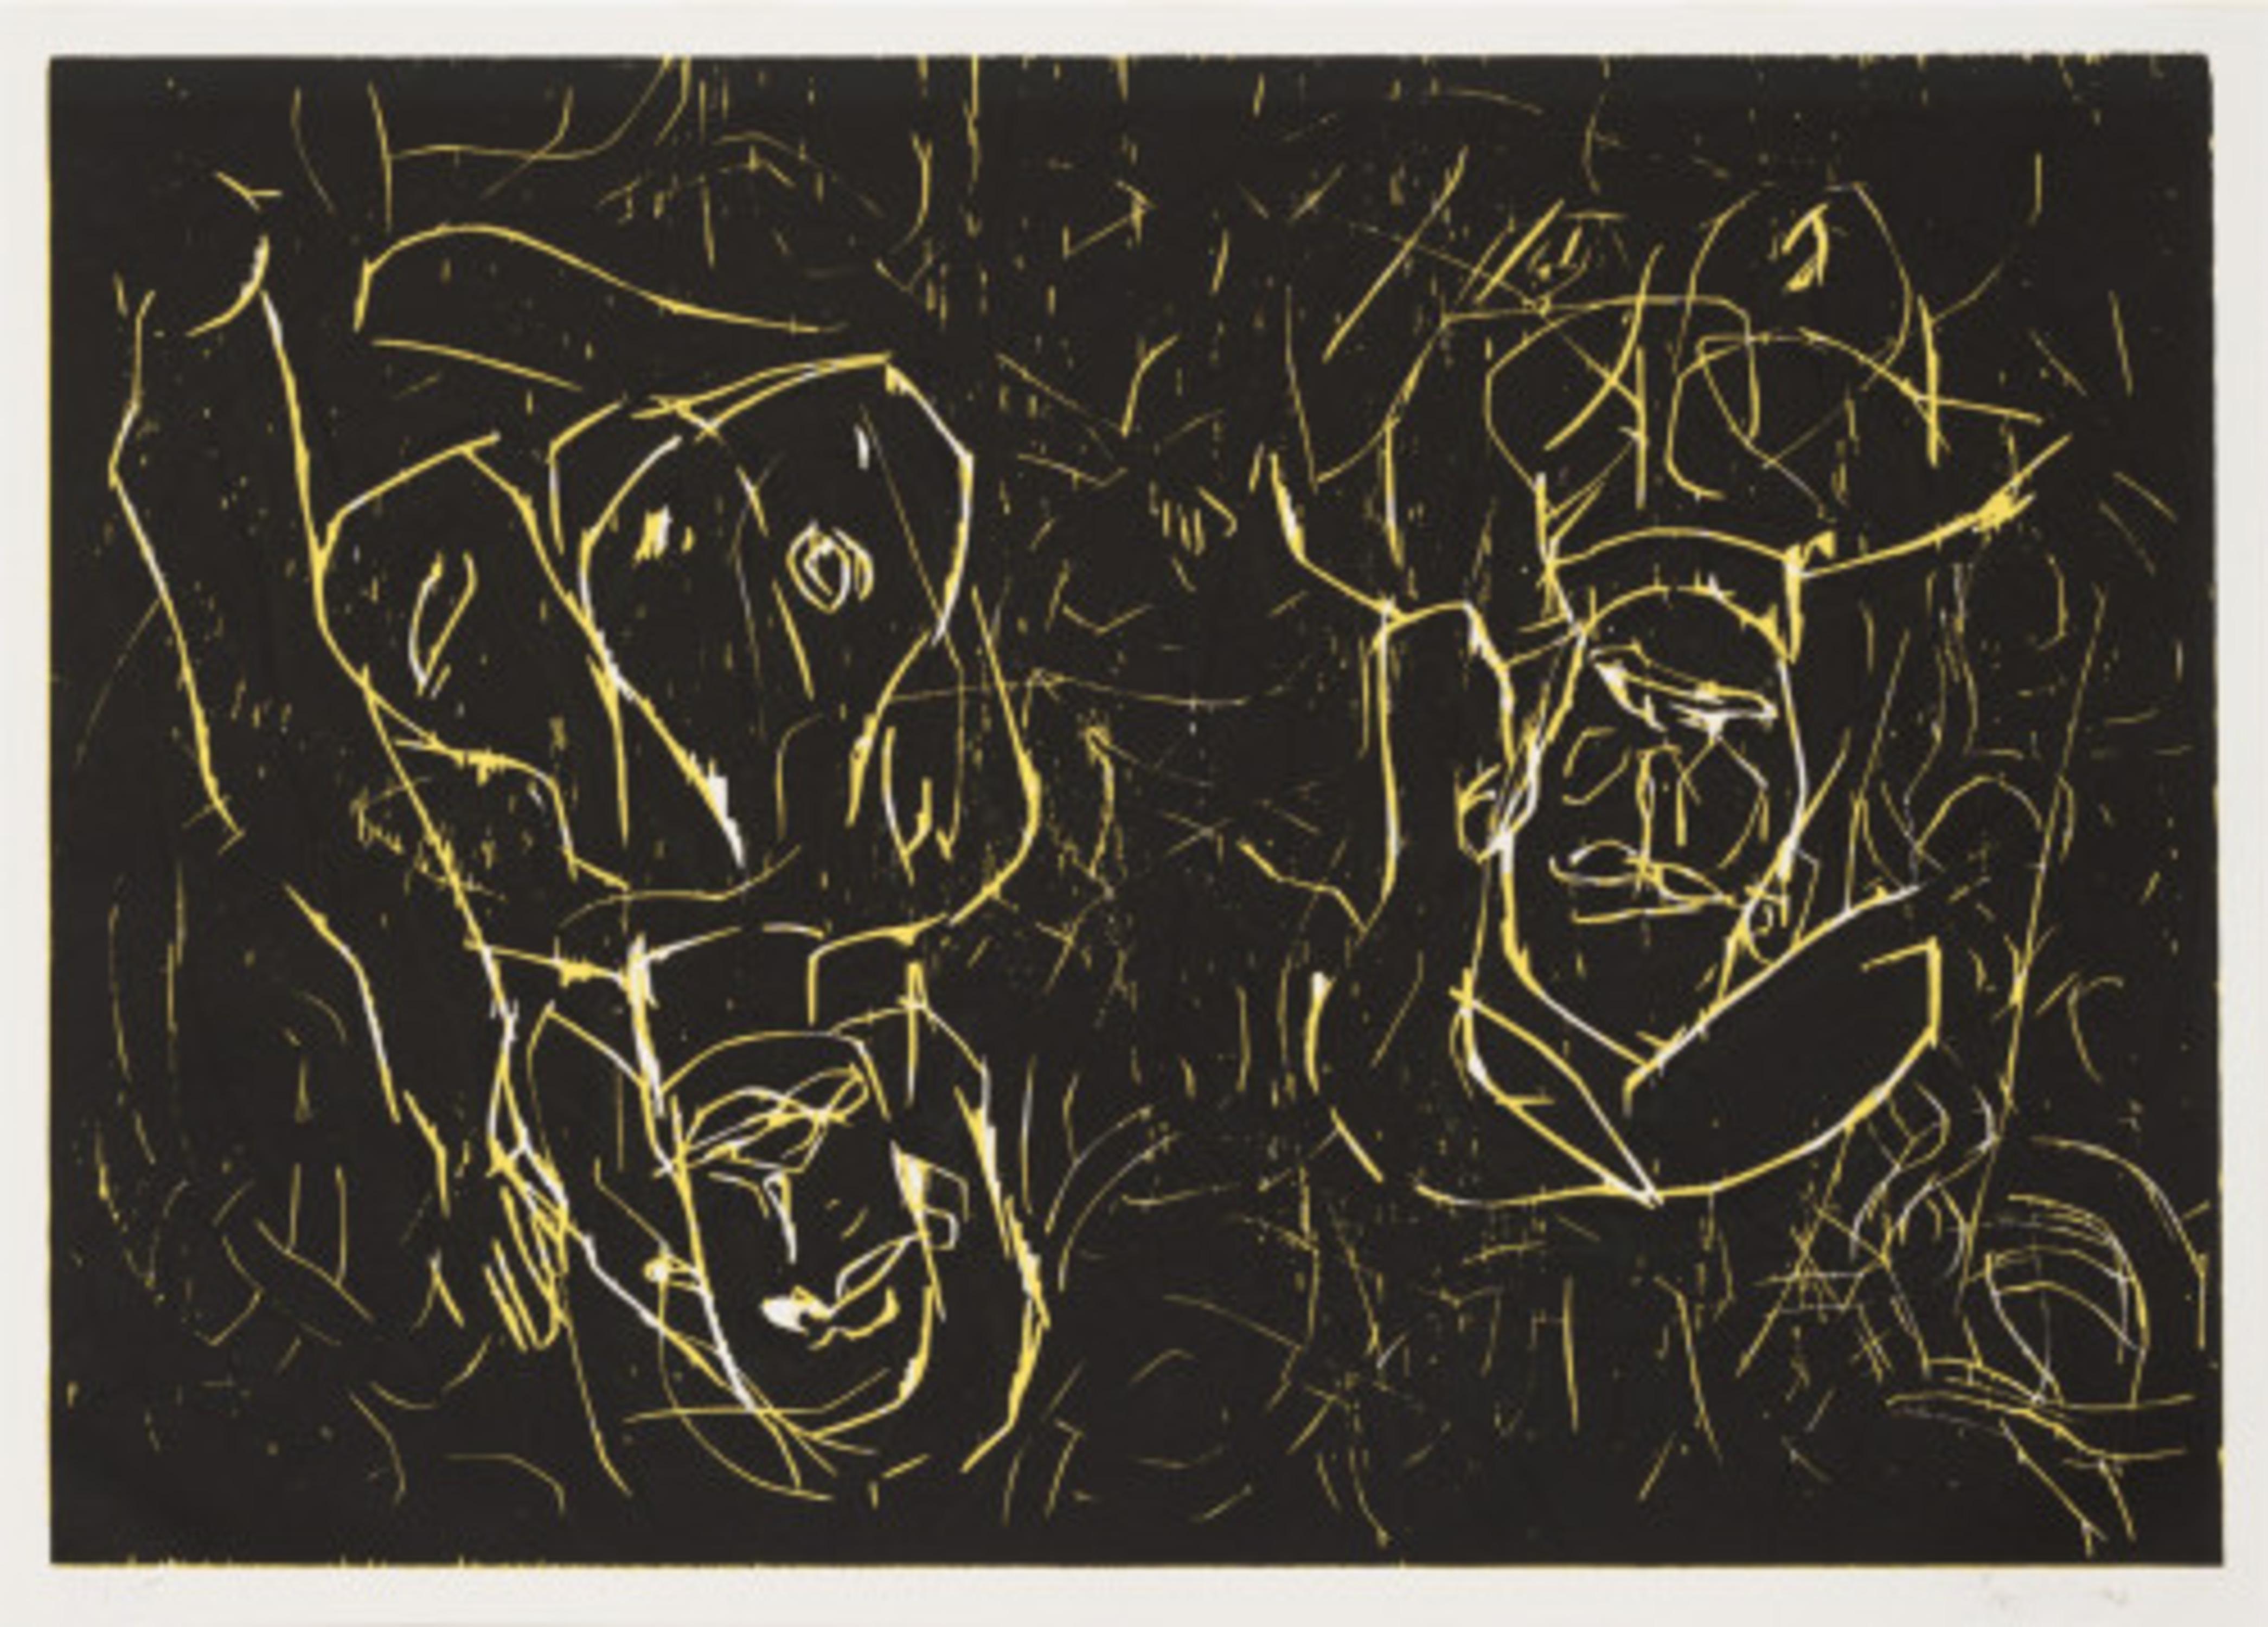 Woman and woman - Print by Georg Baselitz